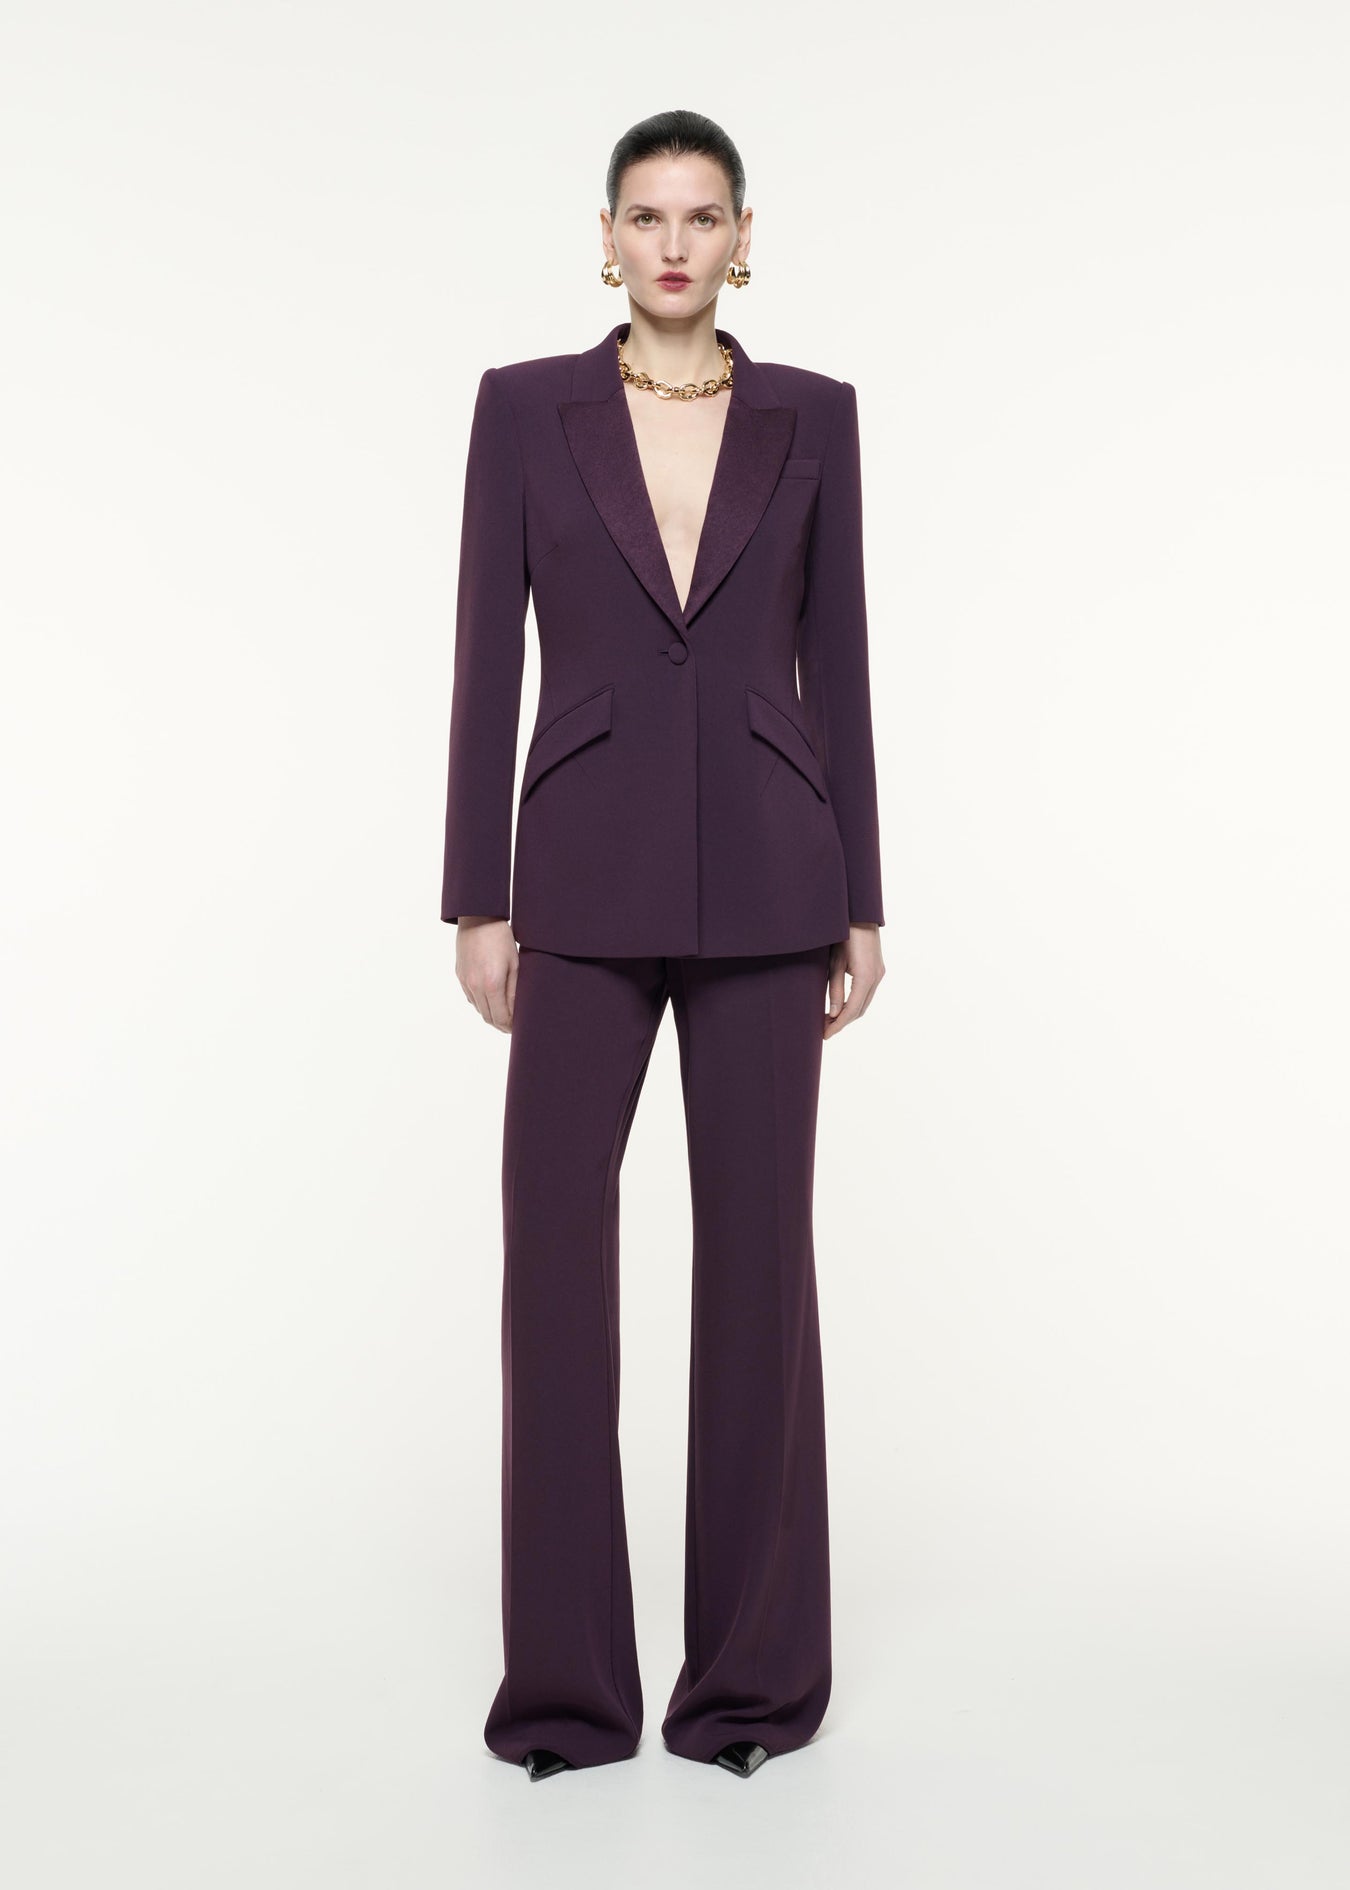 A front view image of a model wearing the Satin Crepe Jacket in Aubergine